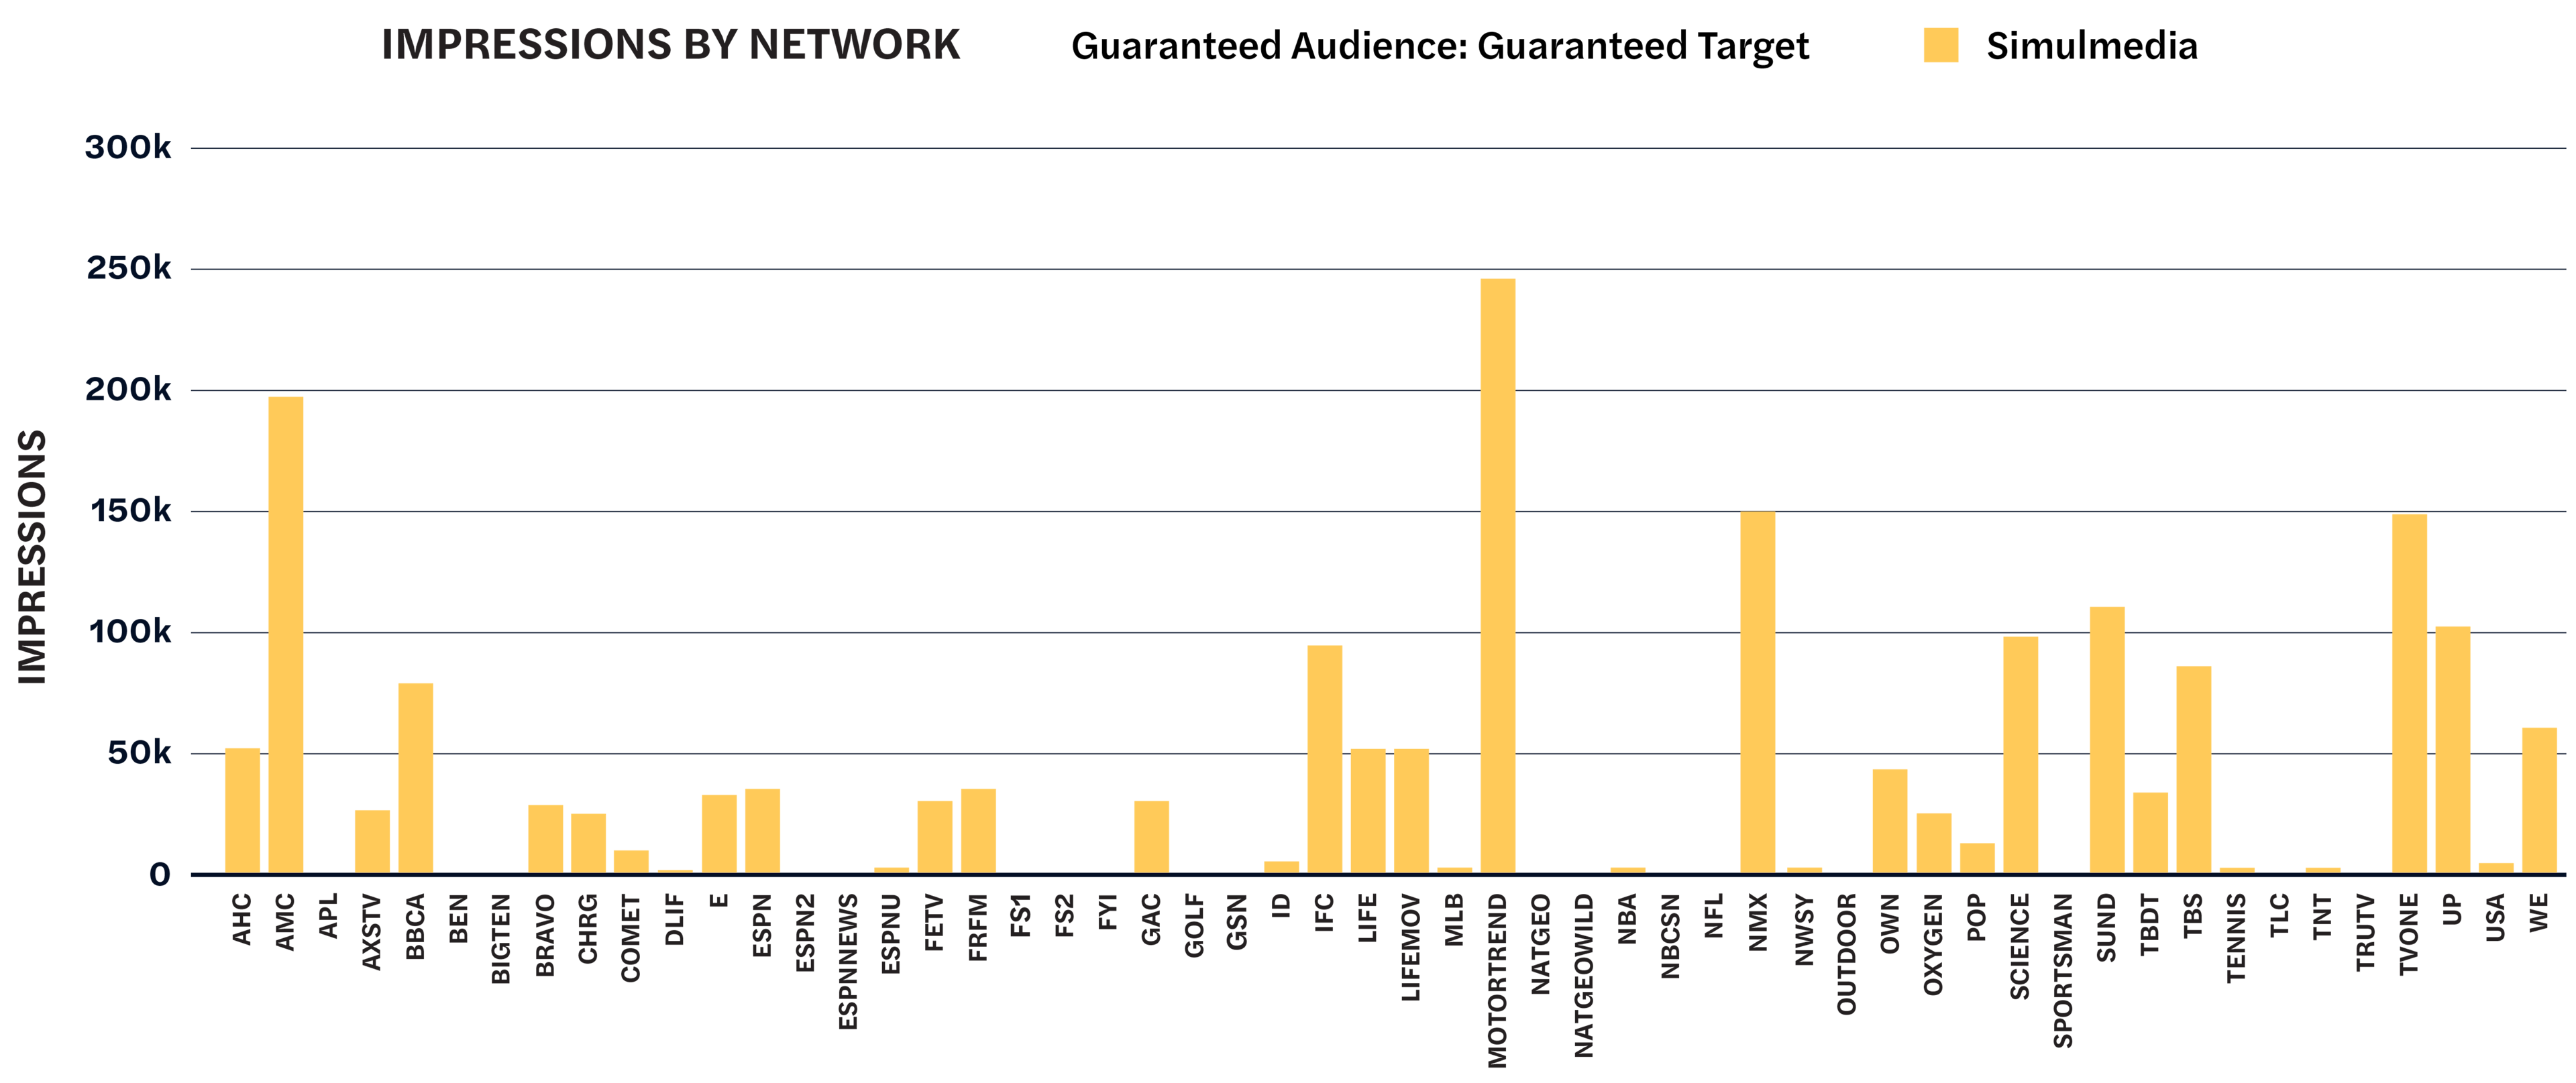 Bar chart showing impressions delivered for a streaming brand by network.